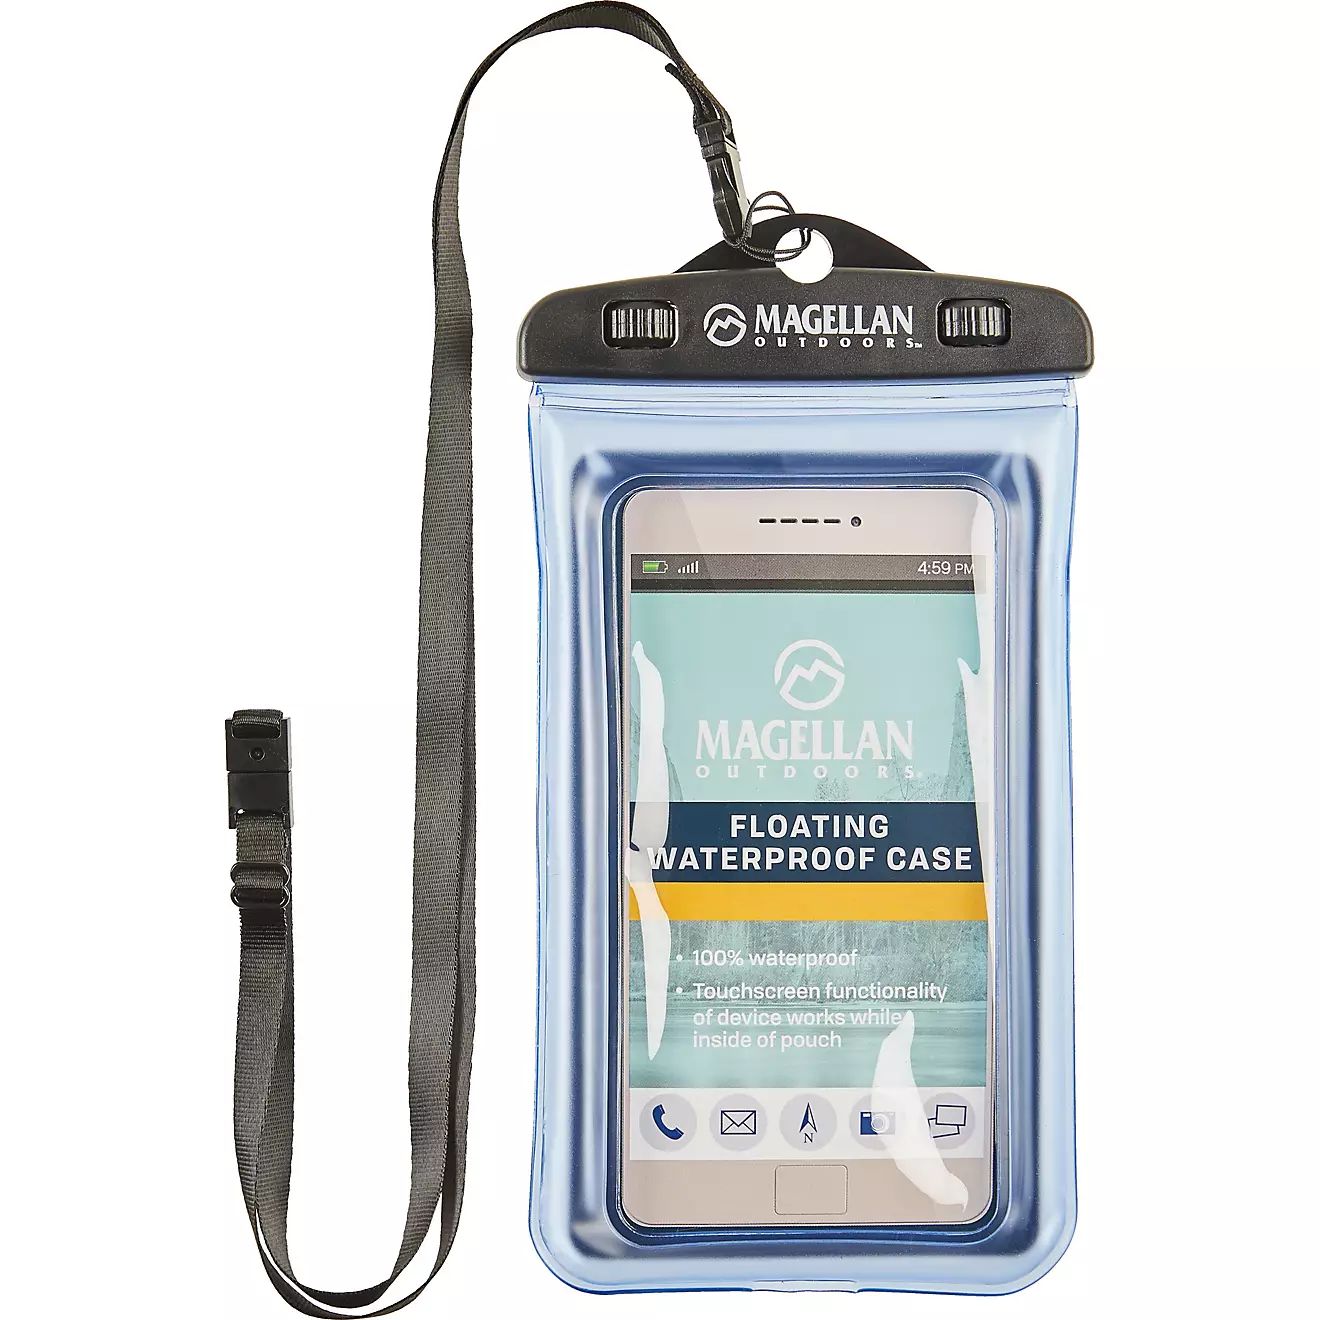 Magellan Outdoors Waterproof Floating Phone Case | Academy | Academy Sports + Outdoors